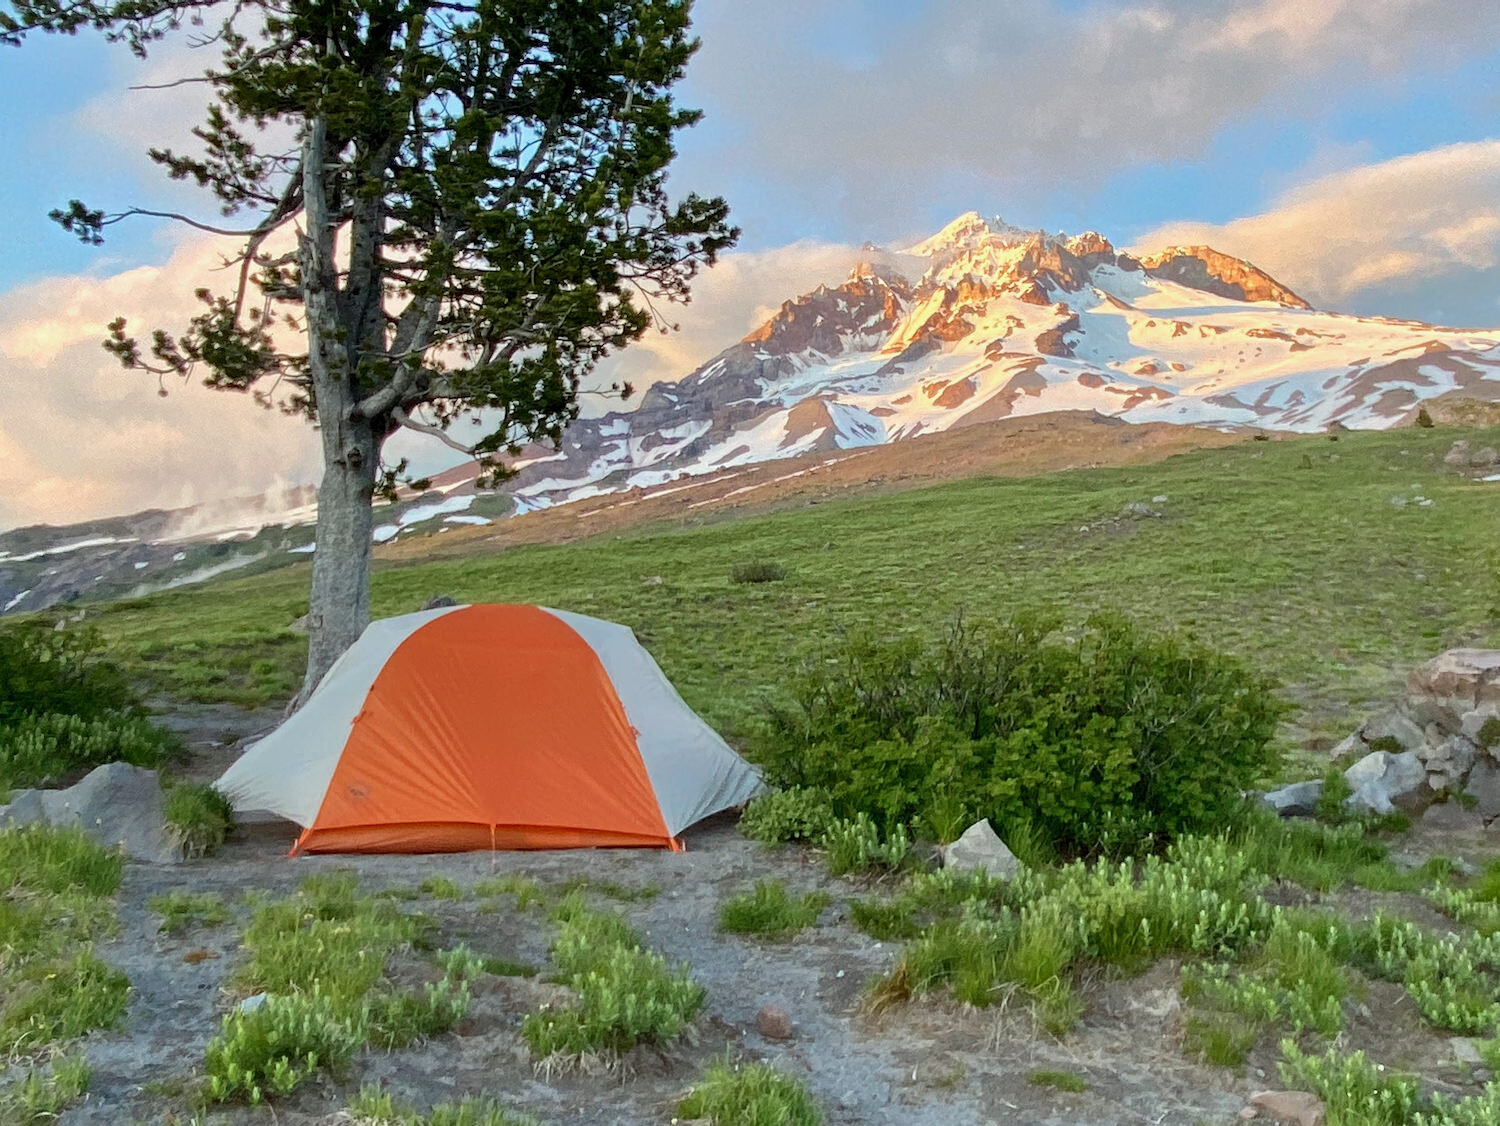 The spacious and lightweight HV UL3 is one of our go-to backpacking tents.